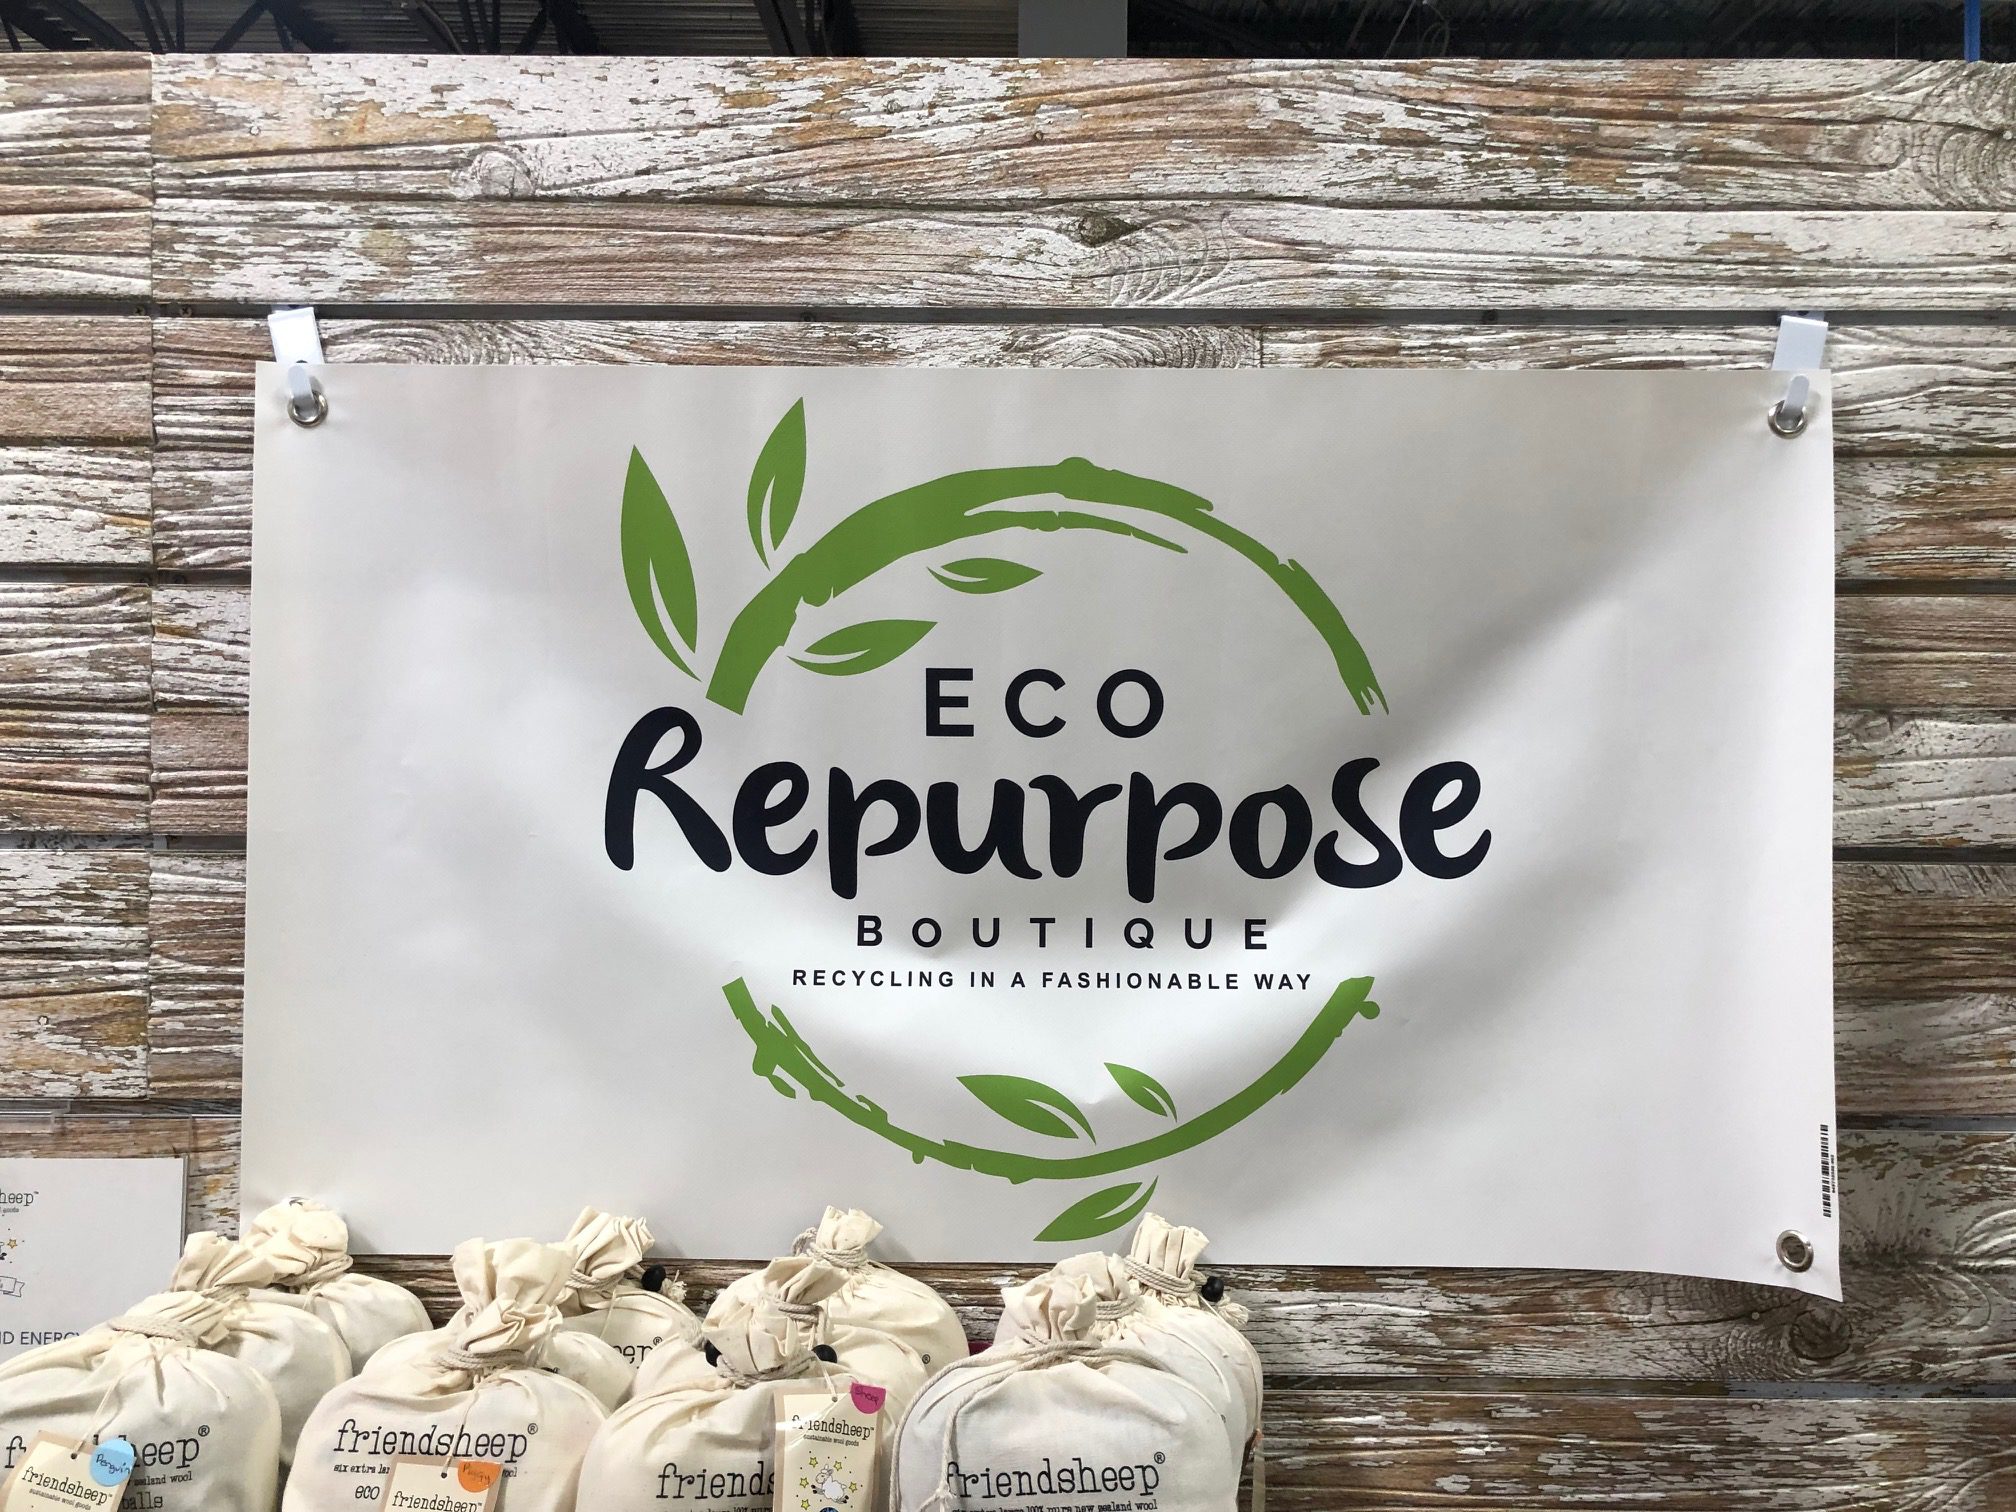 Eco Repurpose Boutique logo on a banner hanging on the wall.